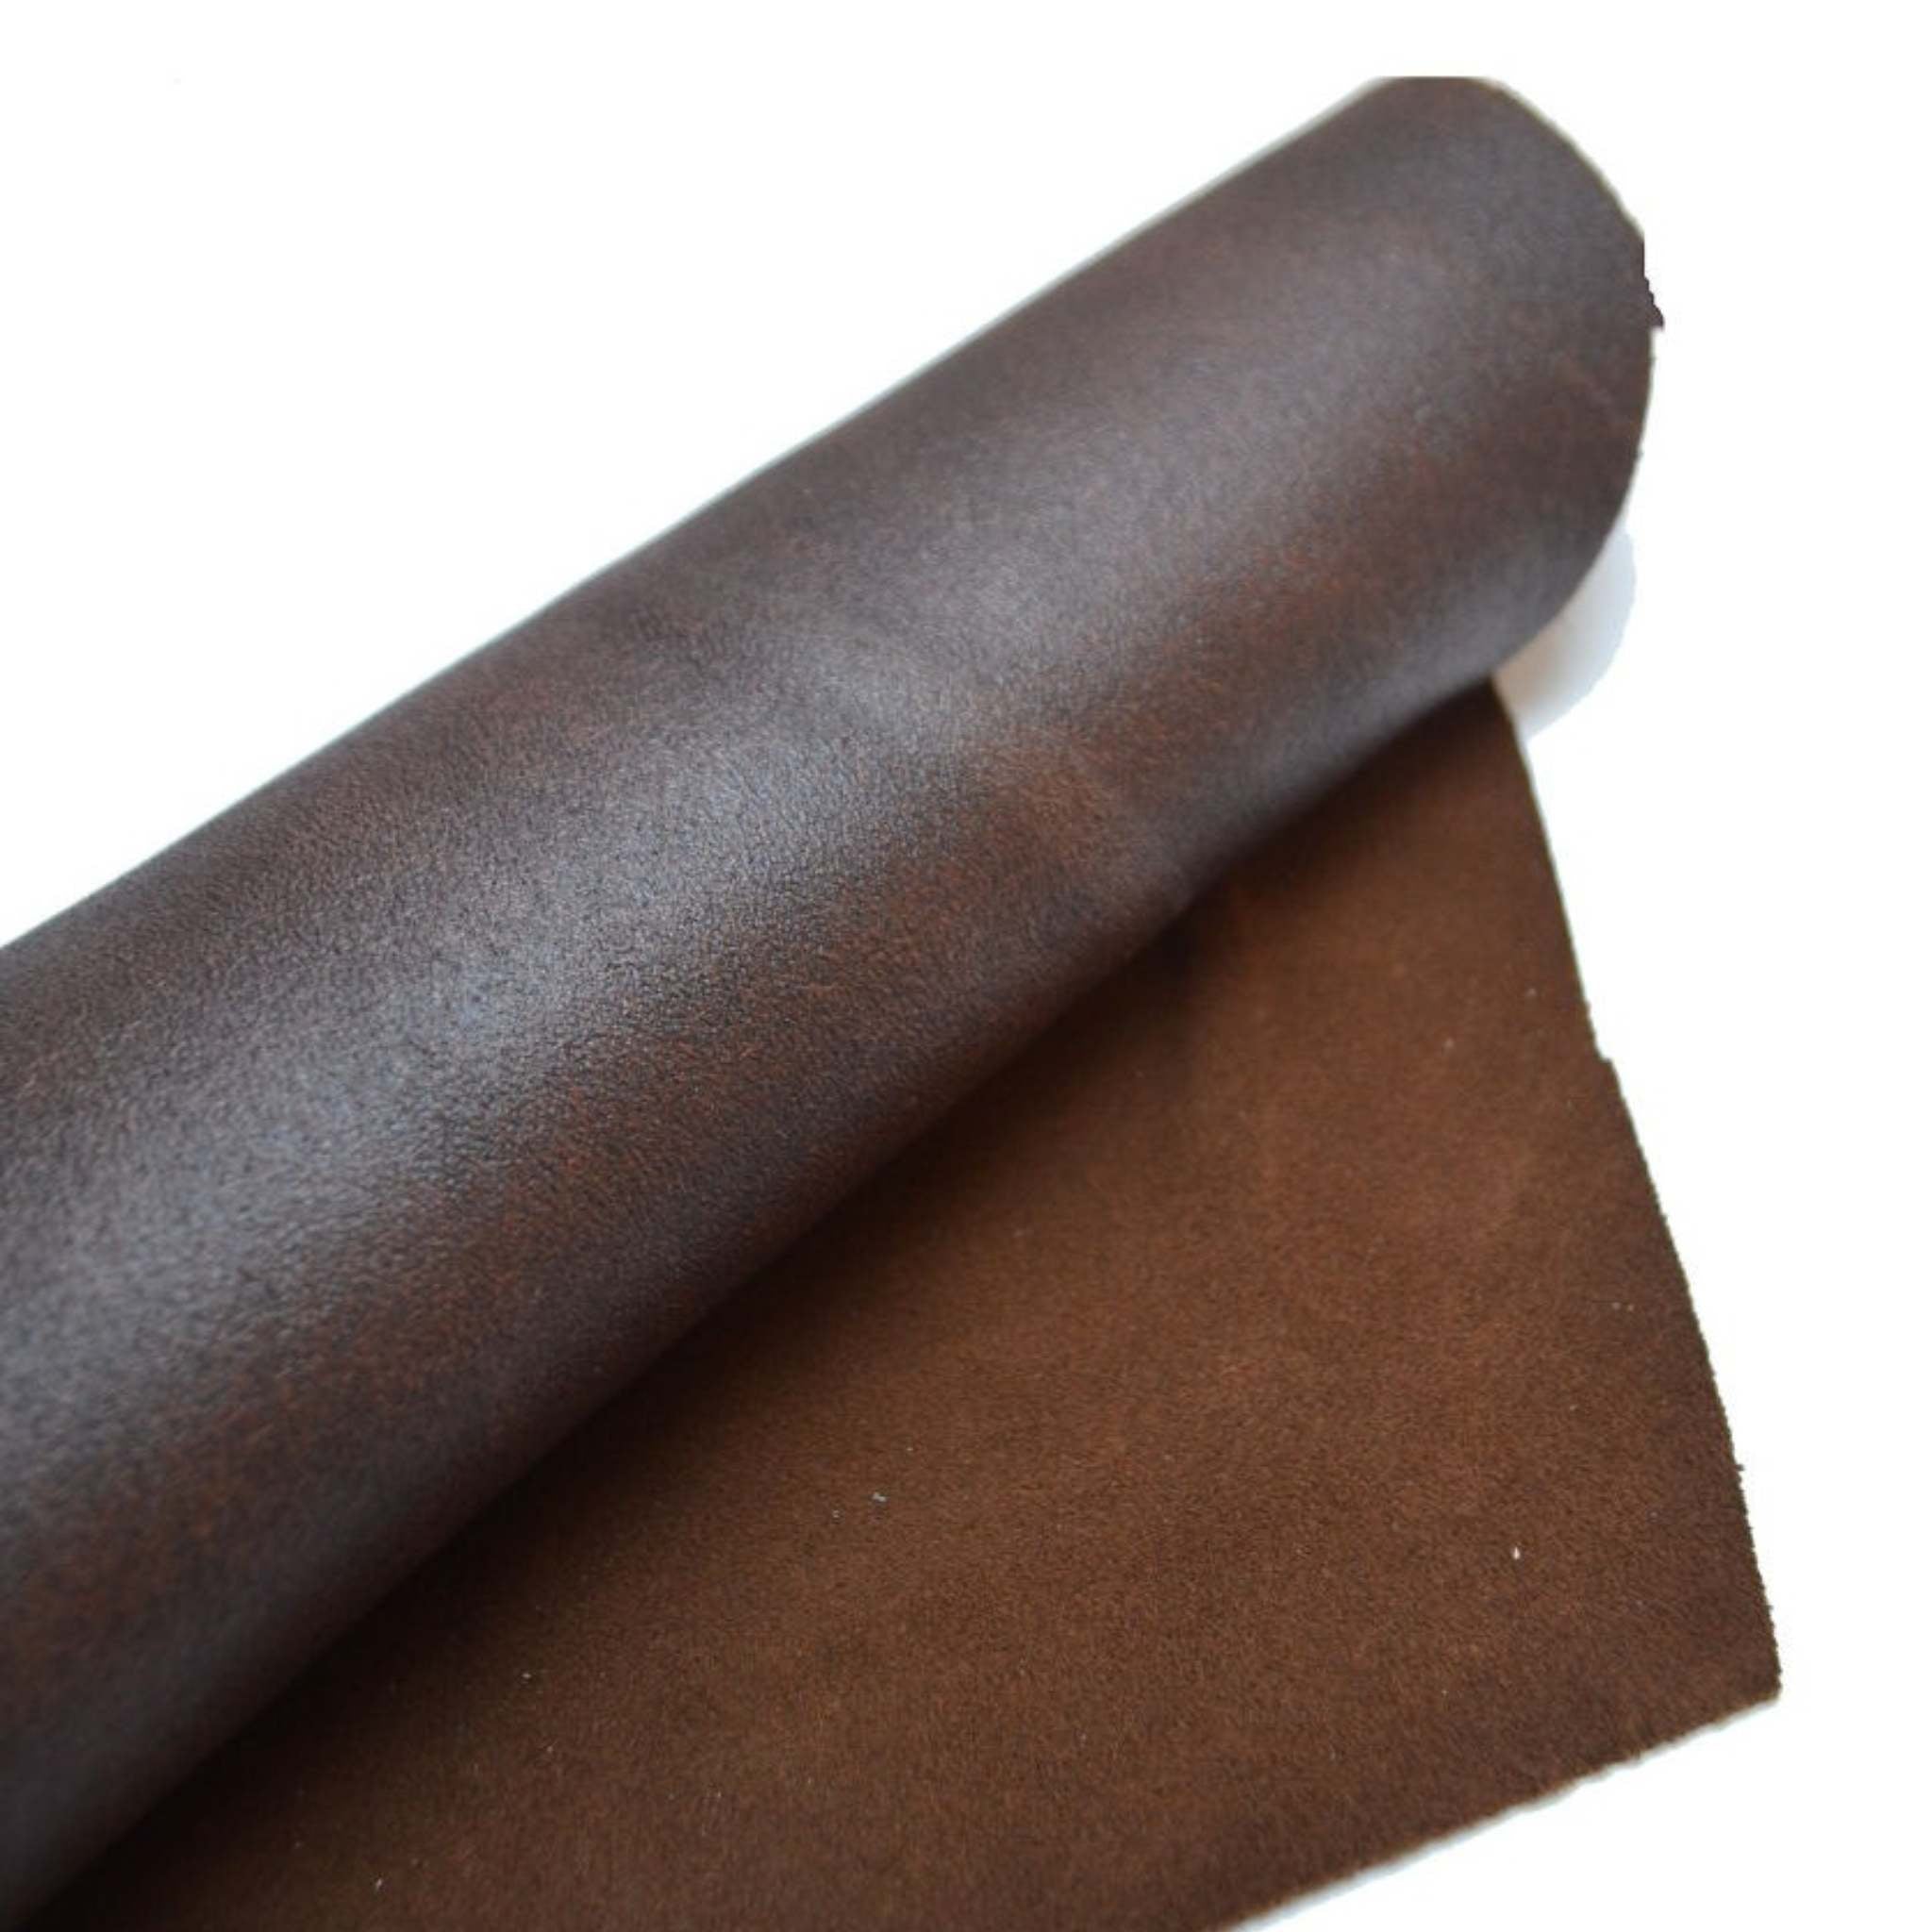 Soft reverse calf leather with textured grain and suede reverse ideal for tool rolls, pouches, half aprons , vintage, bushcraft style